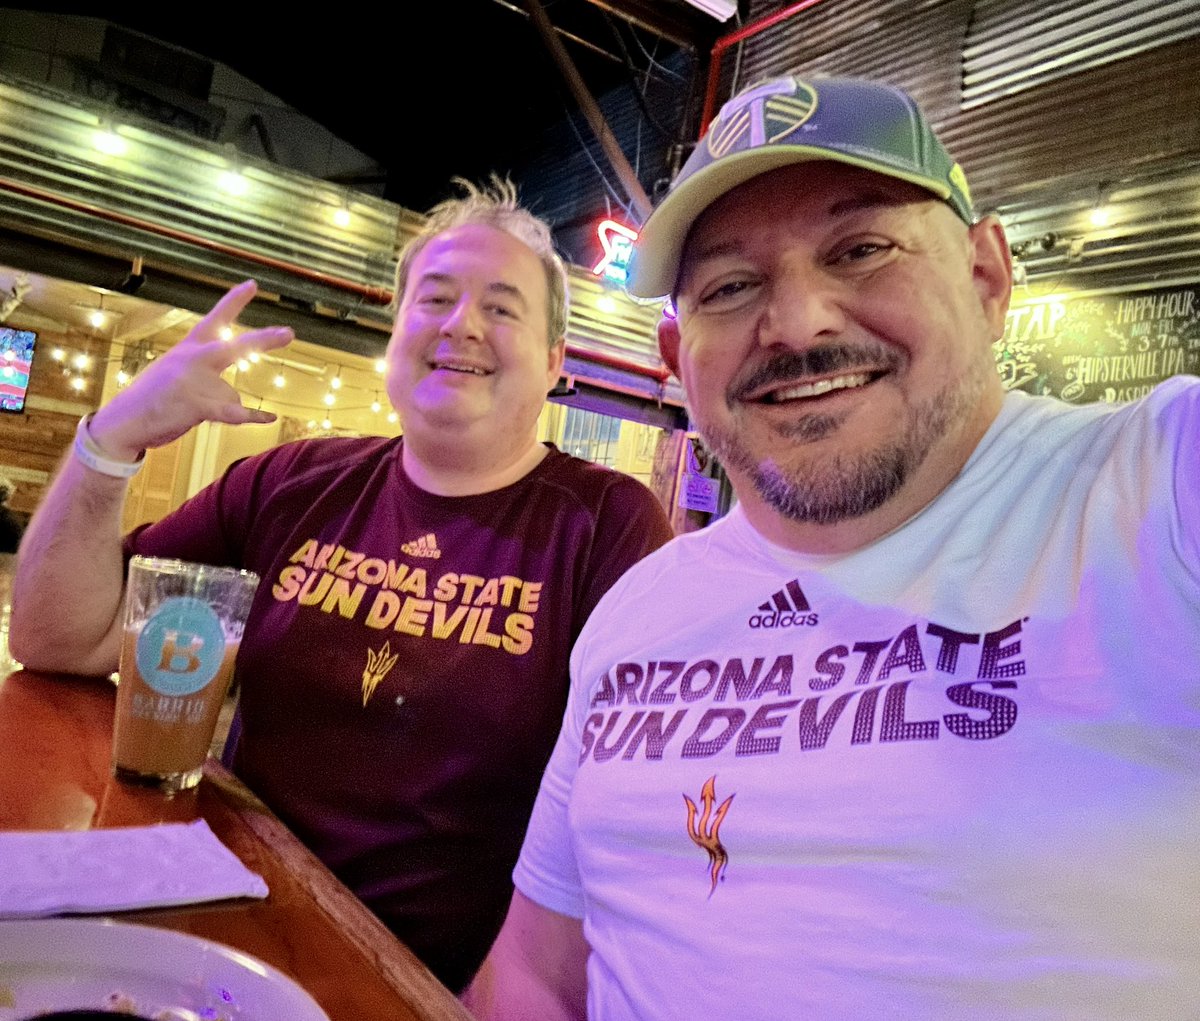 When you meet up & you’re basically wearing the same shirt 🕷️ ↔️🕷️
w/ @andrewtaylor09 at @BarrioBrewing before the @SunDevilSoccer game
 #GoDevils #TerritorialCupSeries 
⚽️🏆⚽️